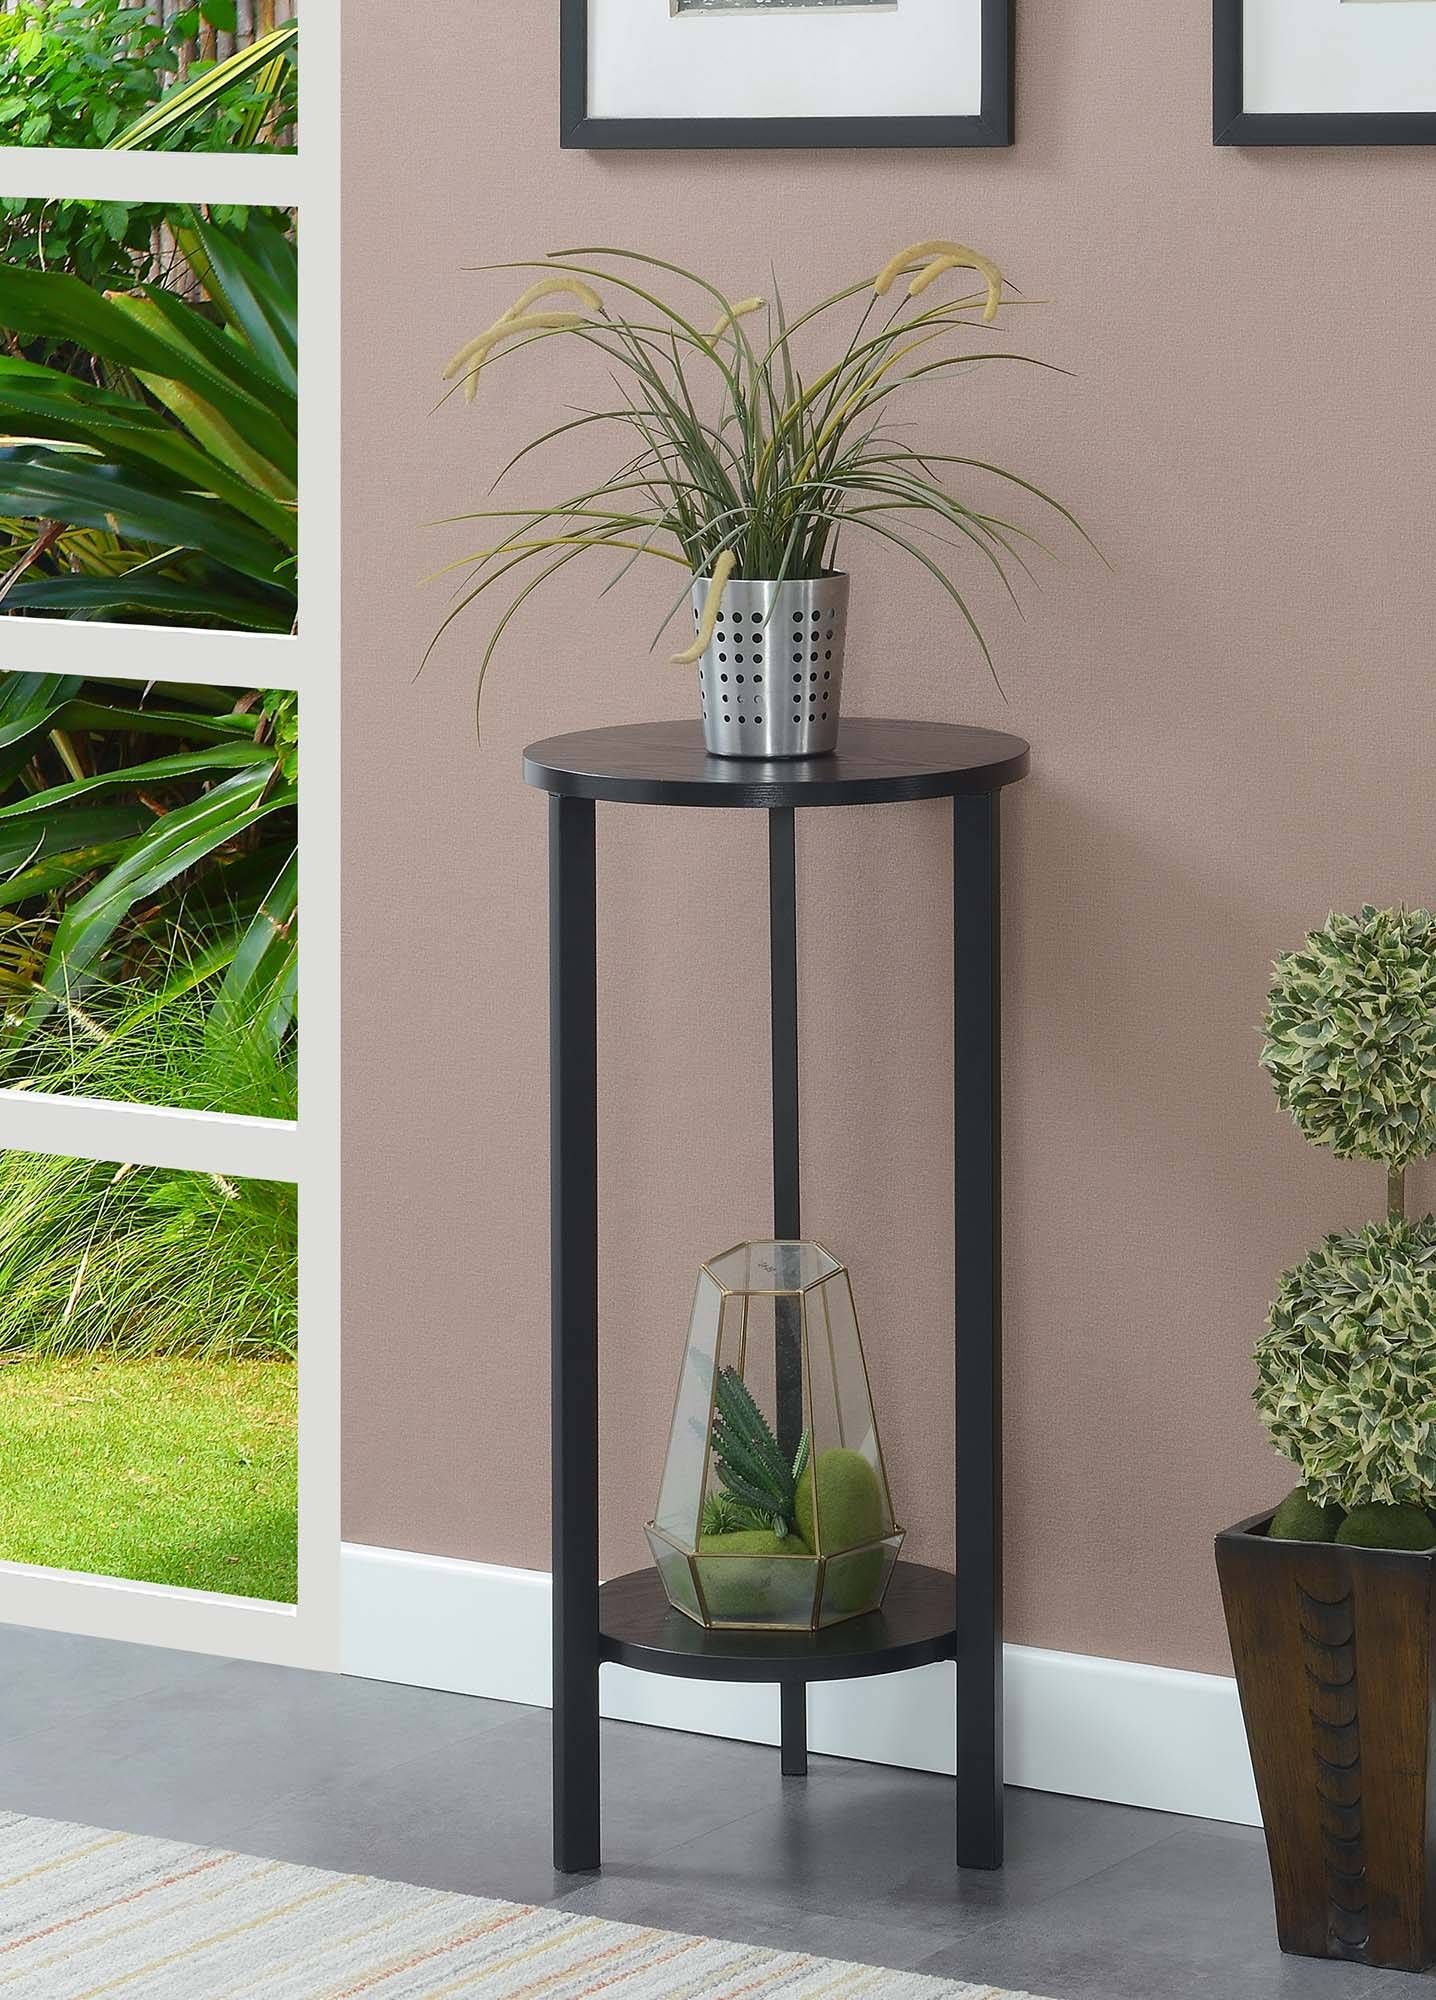 Graystone 31 Inch Plant Stand In Black – Convenience Concepts 111253Blbl In 31 Inch Plant Stands (View 3 of 15)